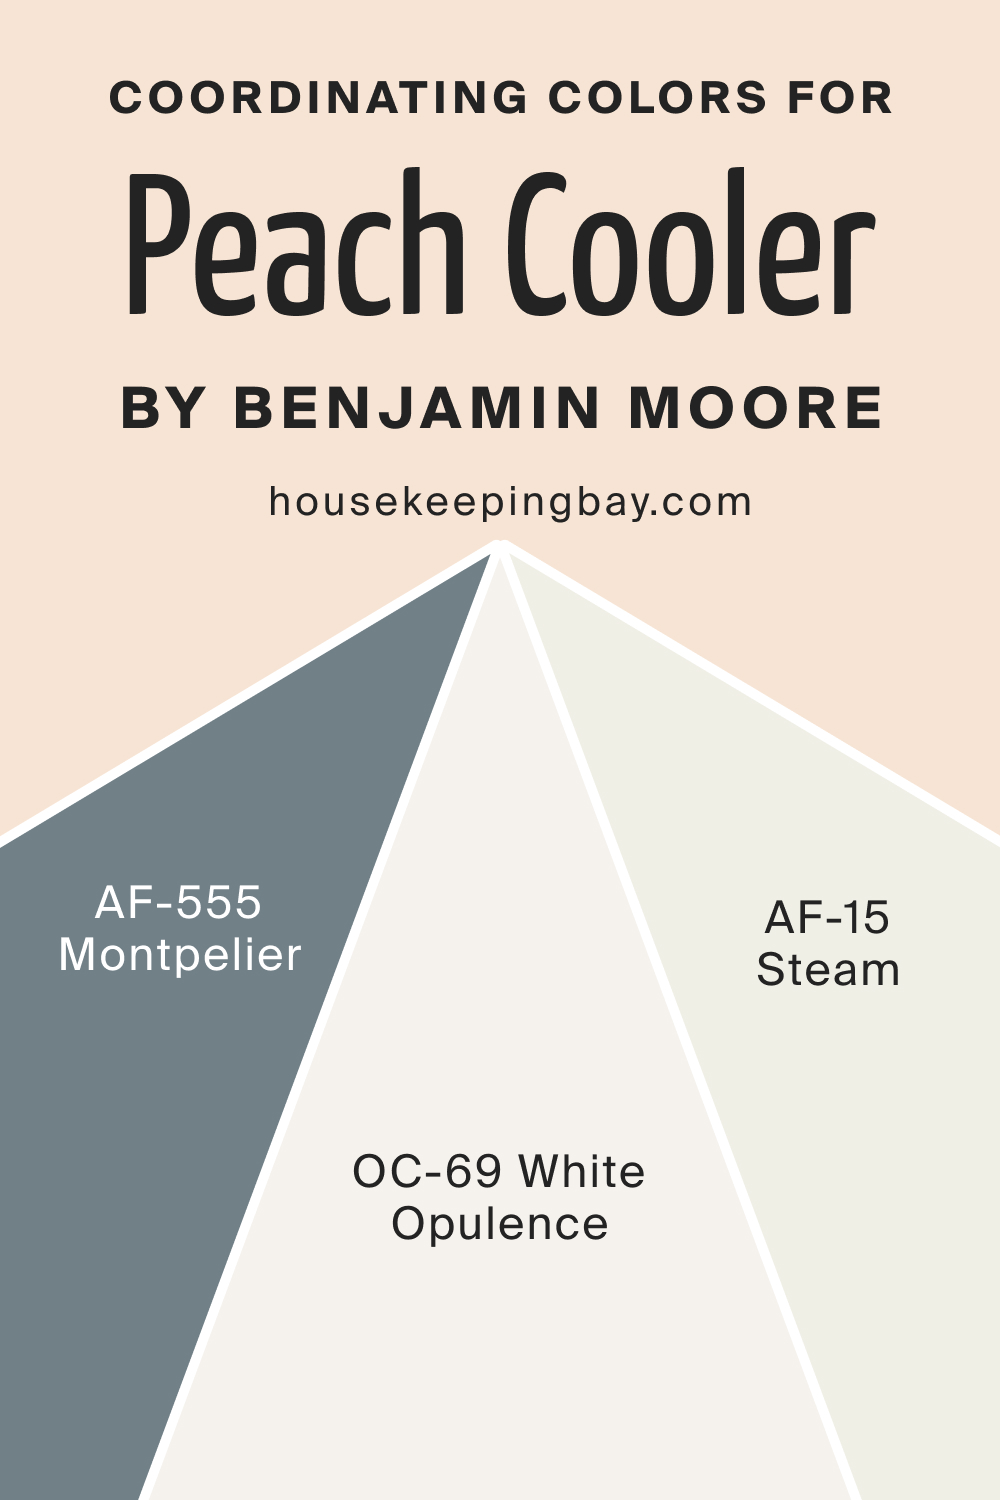 Coordinating Colors for Peach Cooler 022 by Benjamin Moore